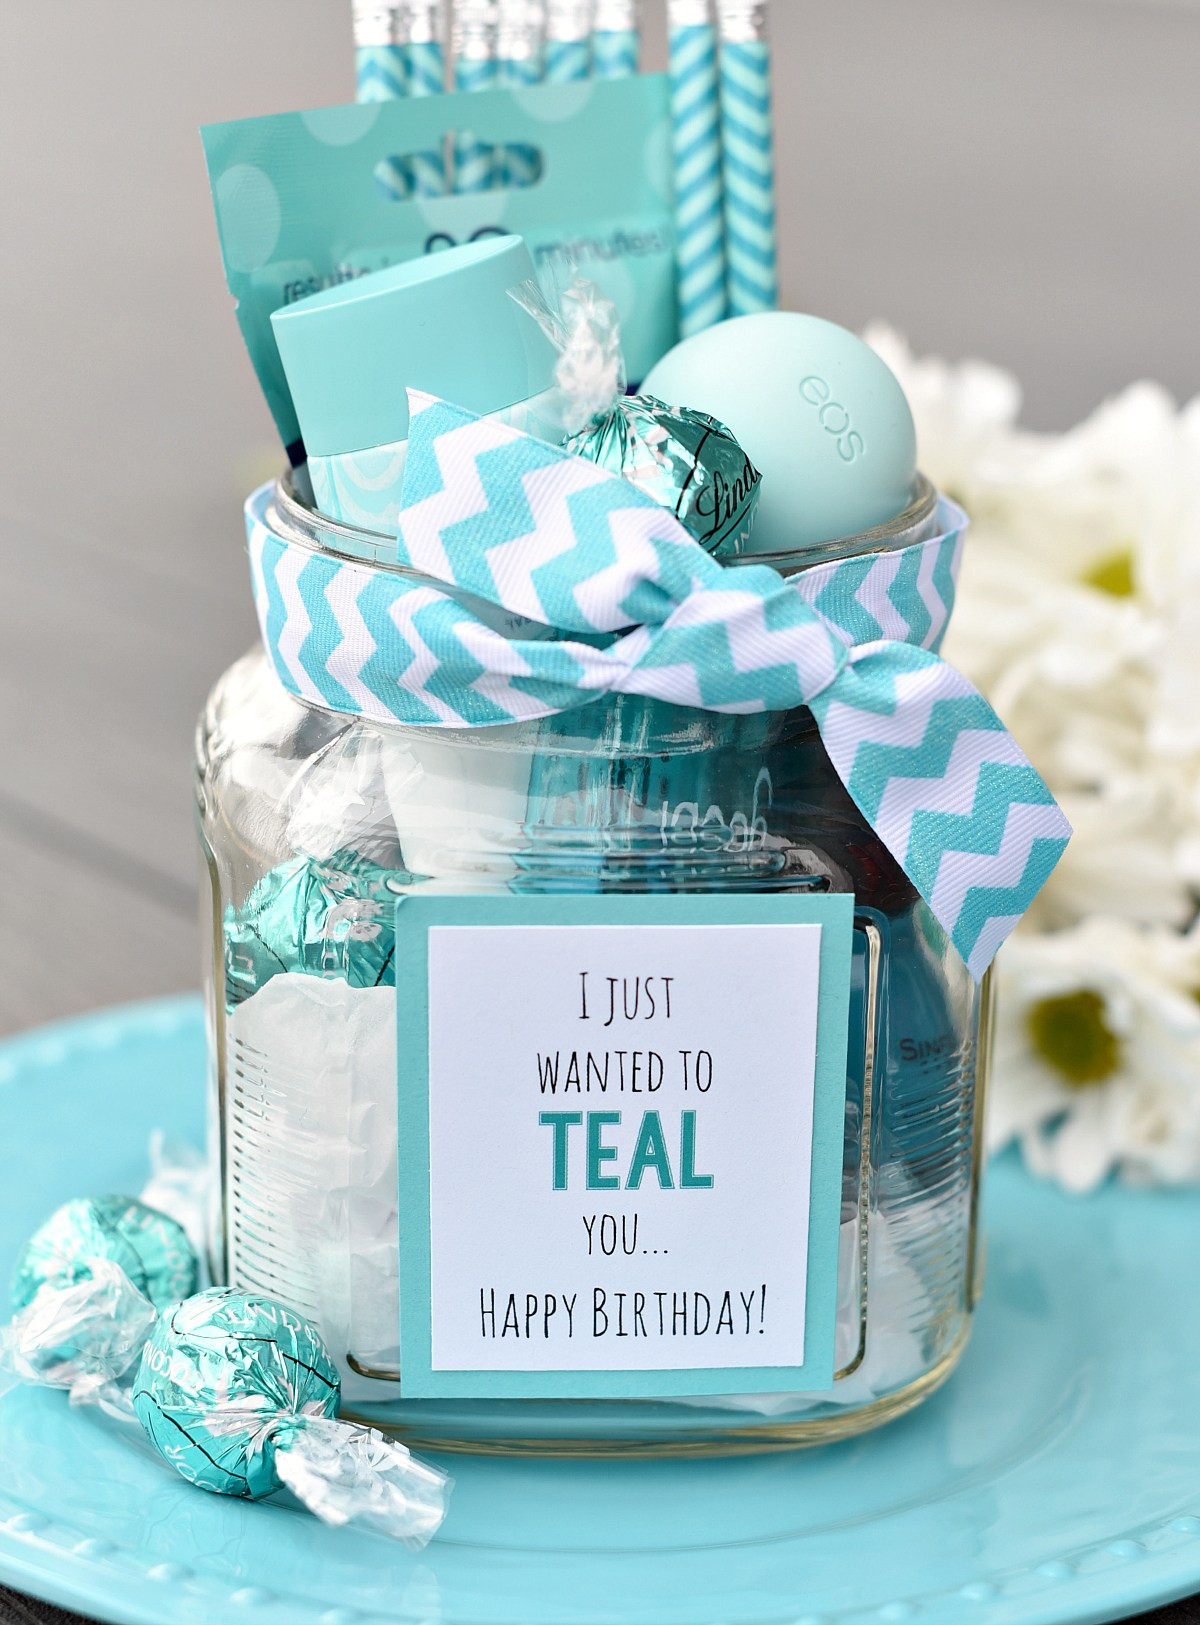 Birthday Gifts For Friend
 Teal Birthday Gift Idea for Friends – Fun Squared